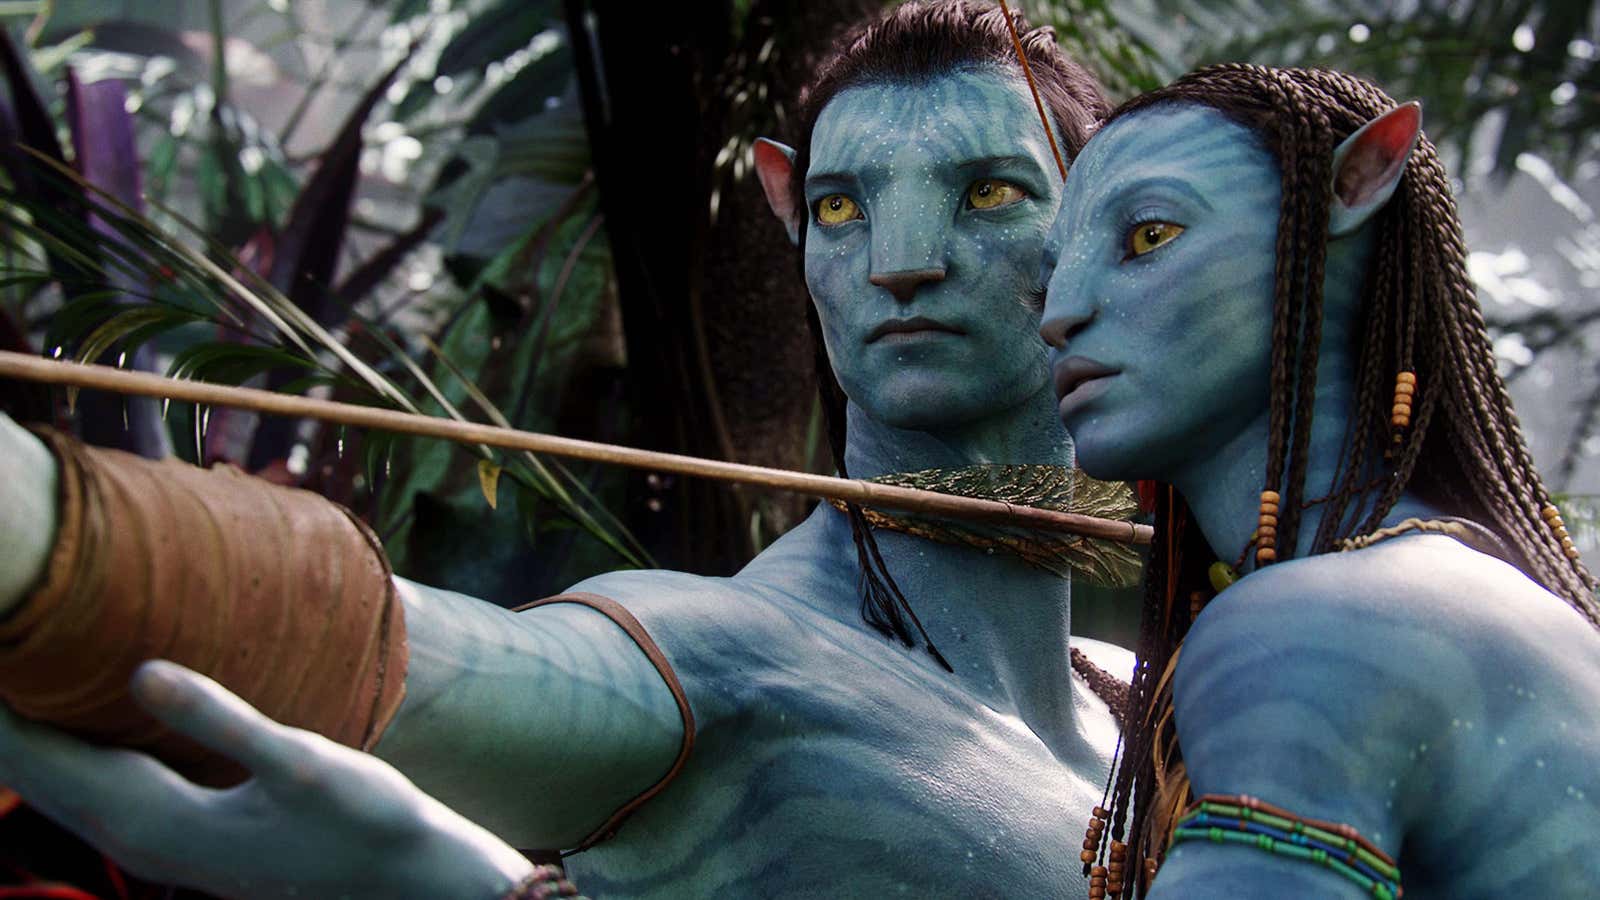 Avatar, Avengers: Endgame, Barbie: Fastest films to reach the one